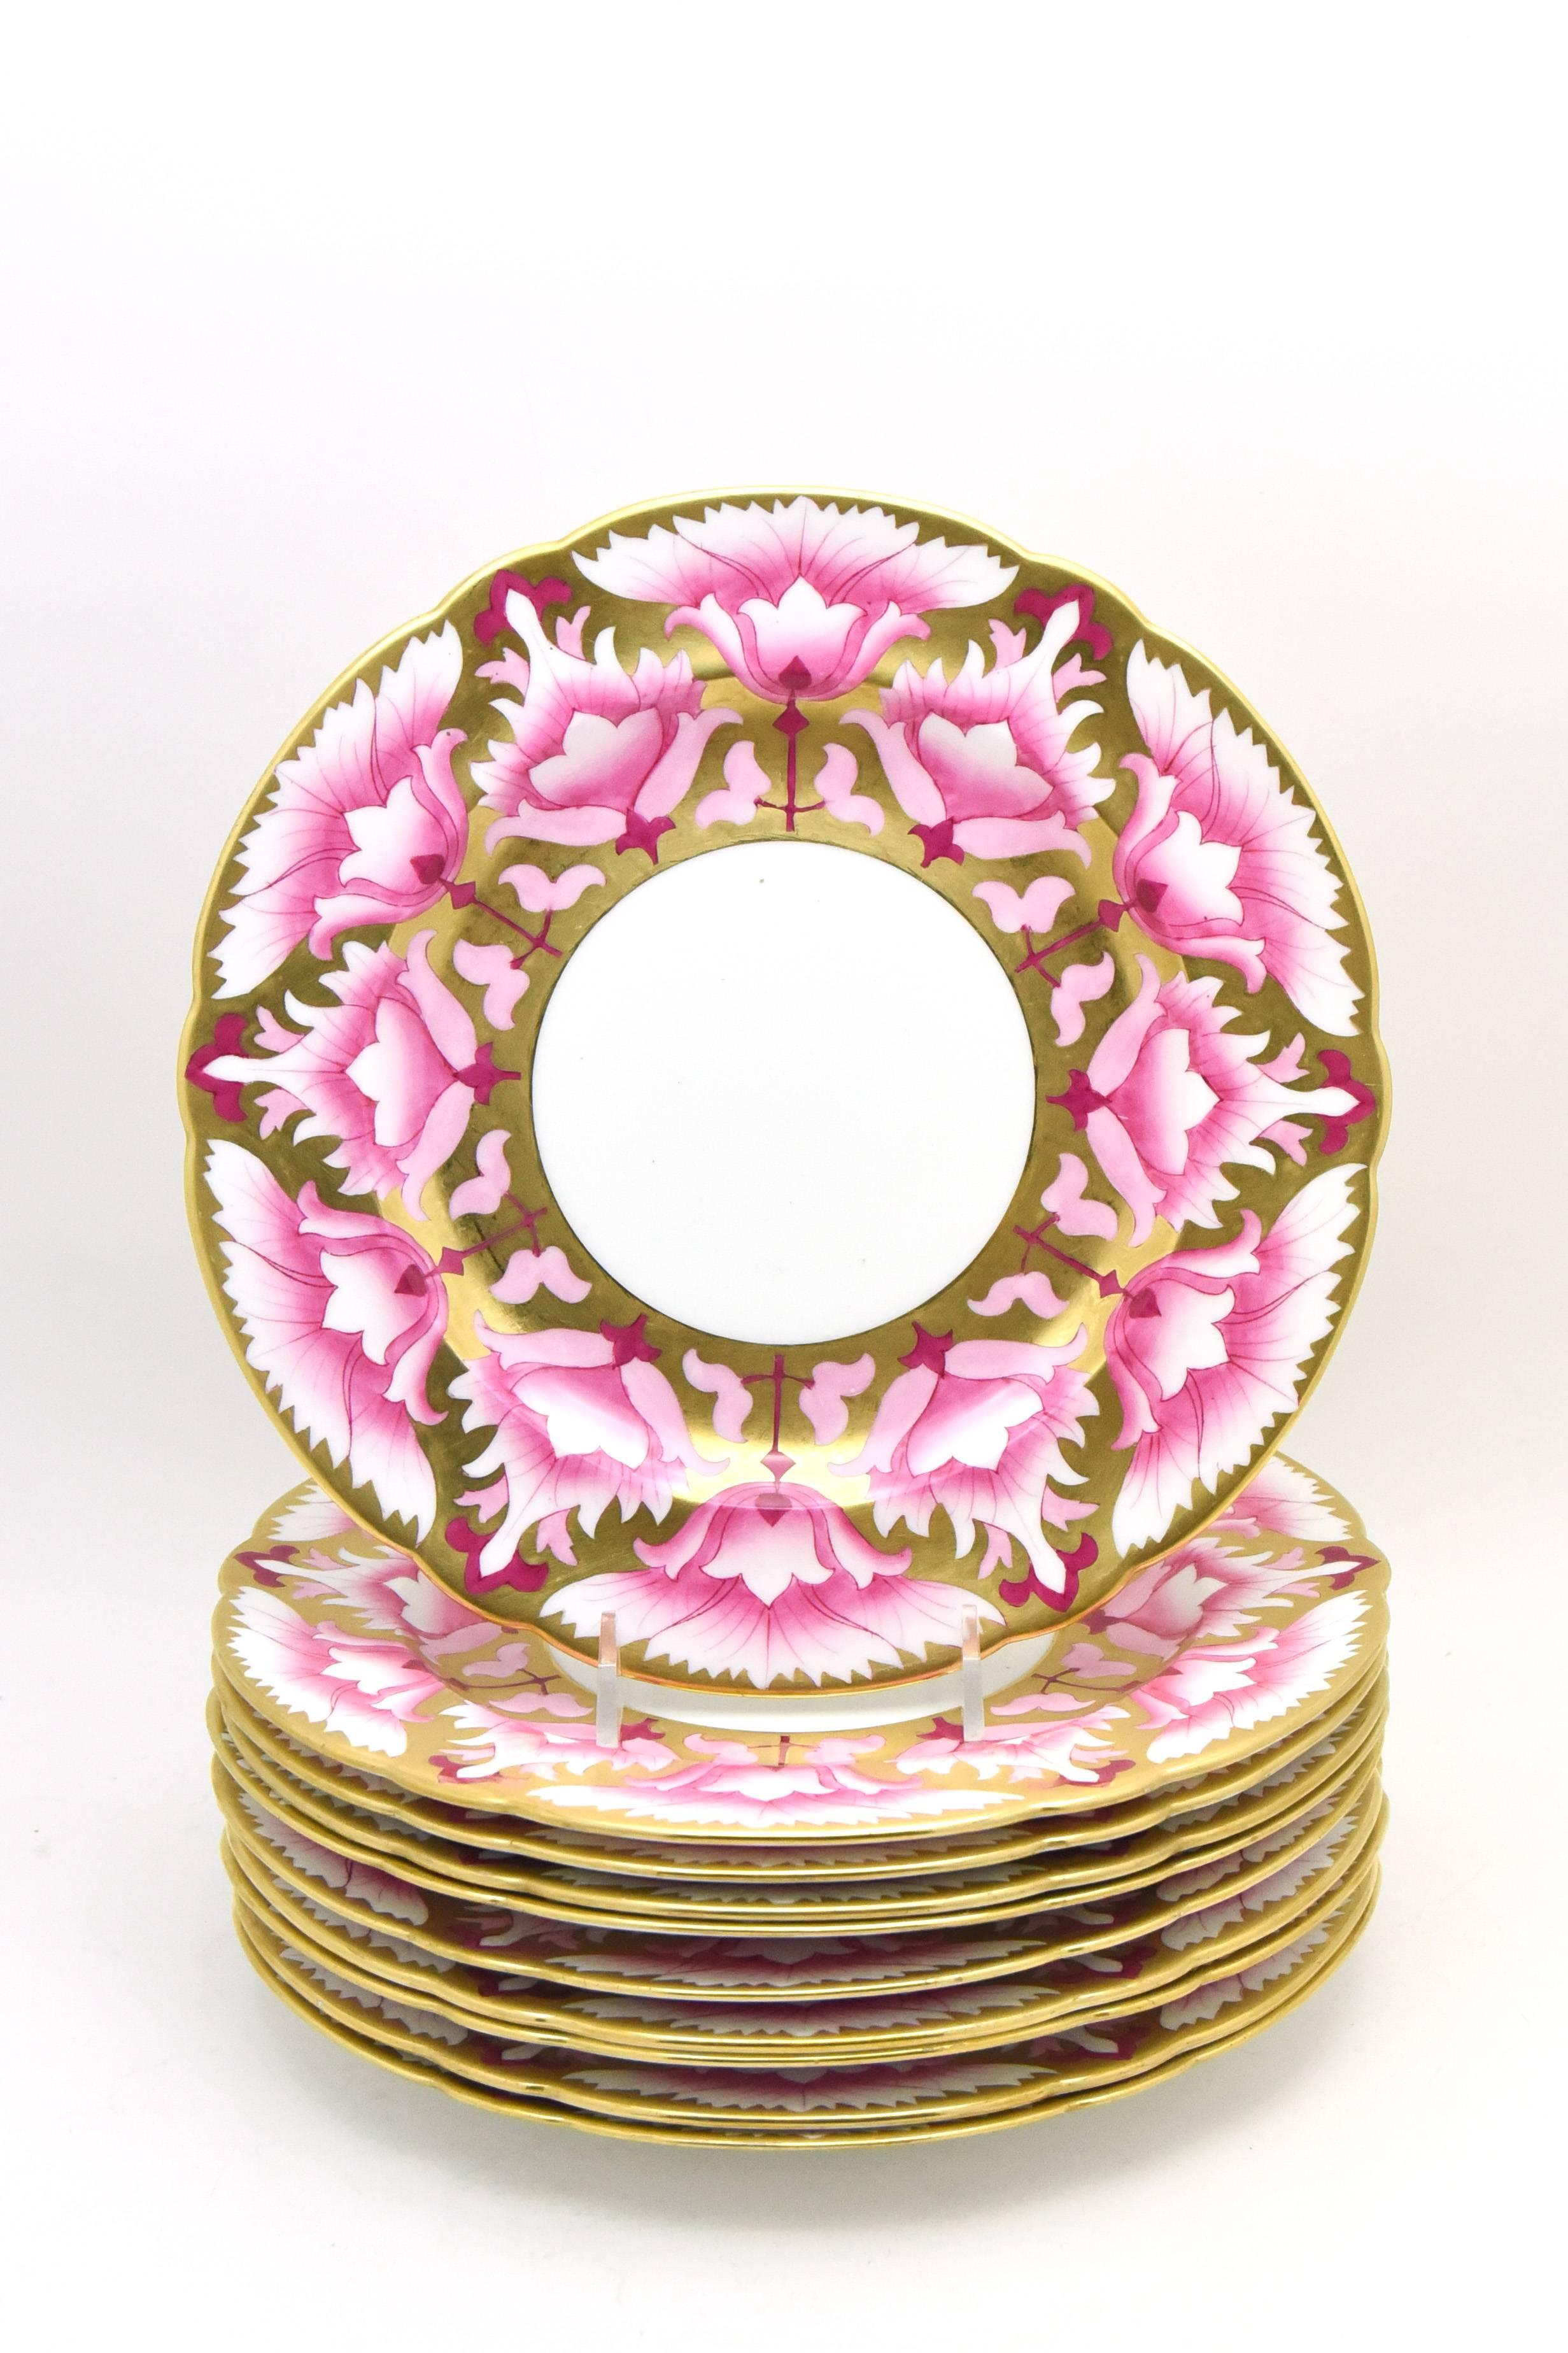 This is a set of ten Foley China, England dessert plates with an unusual and distinctive Arts and Crafts pattern that takes your breath away. The striking combination of colors in contrasting pinks, creates a dramatic statement and the addition of